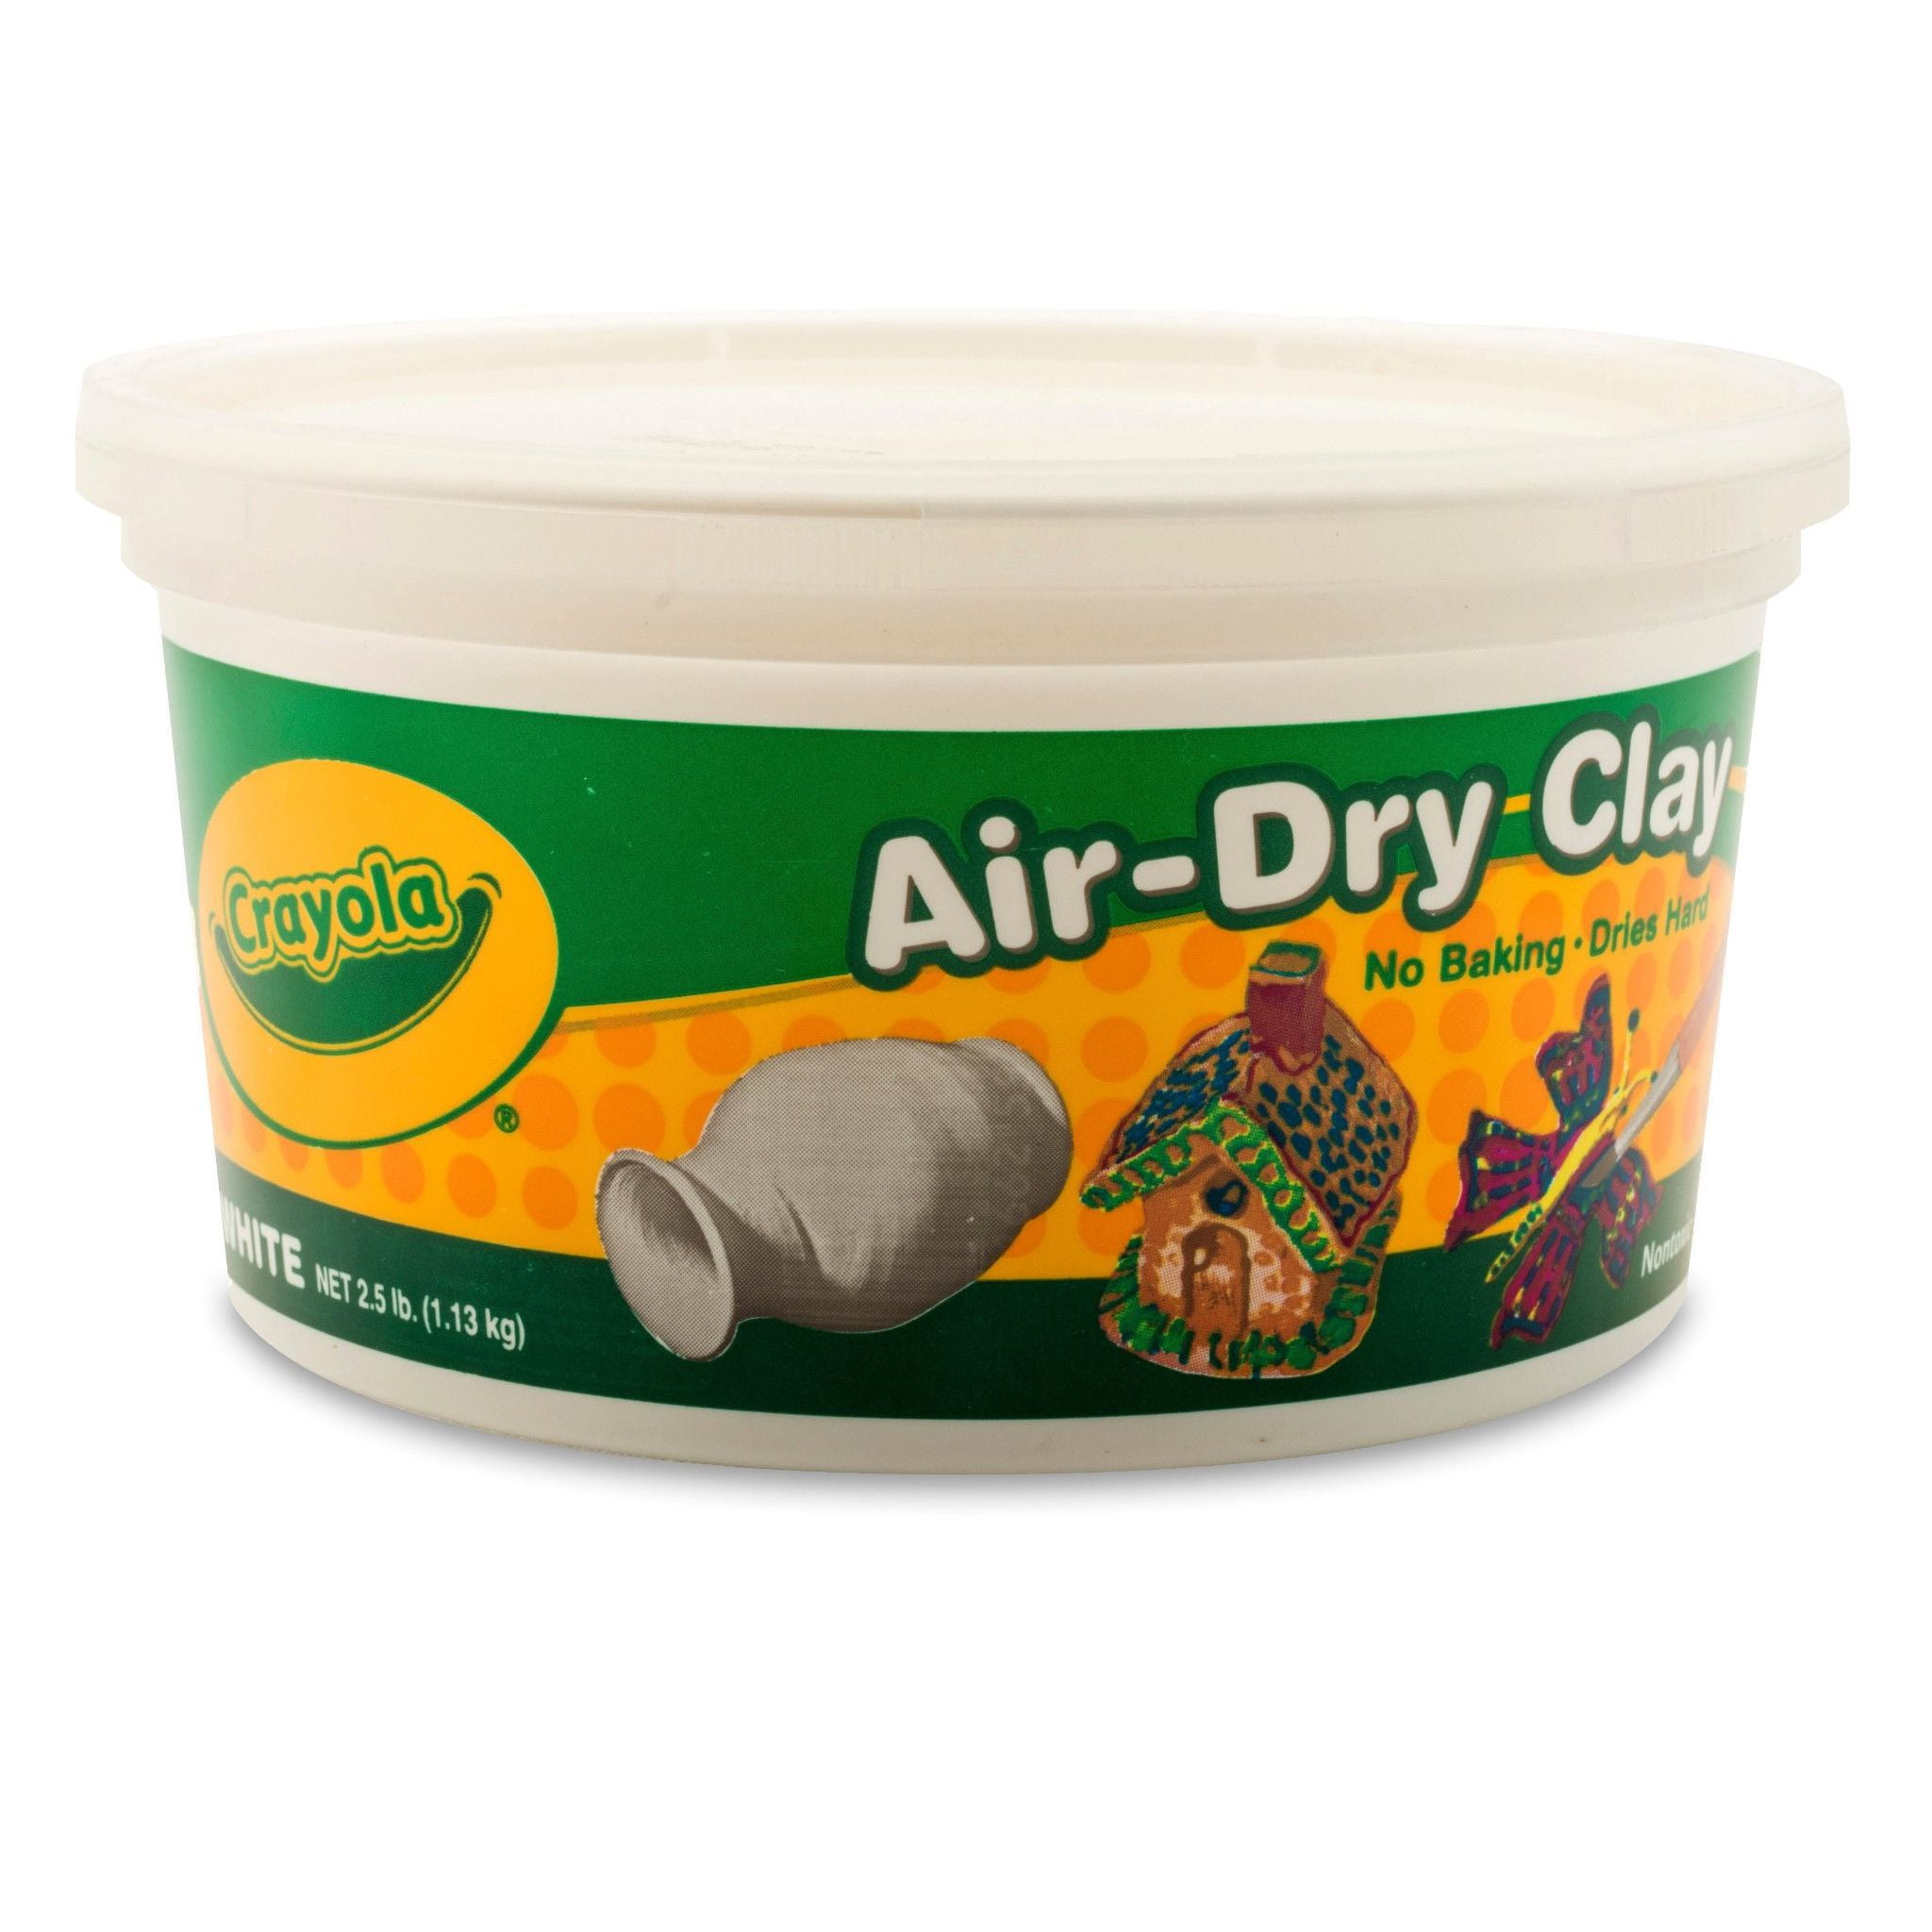 CRAYOLA AIR-DRY NATURAL EARTH CLAY 5 POUND TUB WHITE FOR AGES 4 TO 18 YEARS 